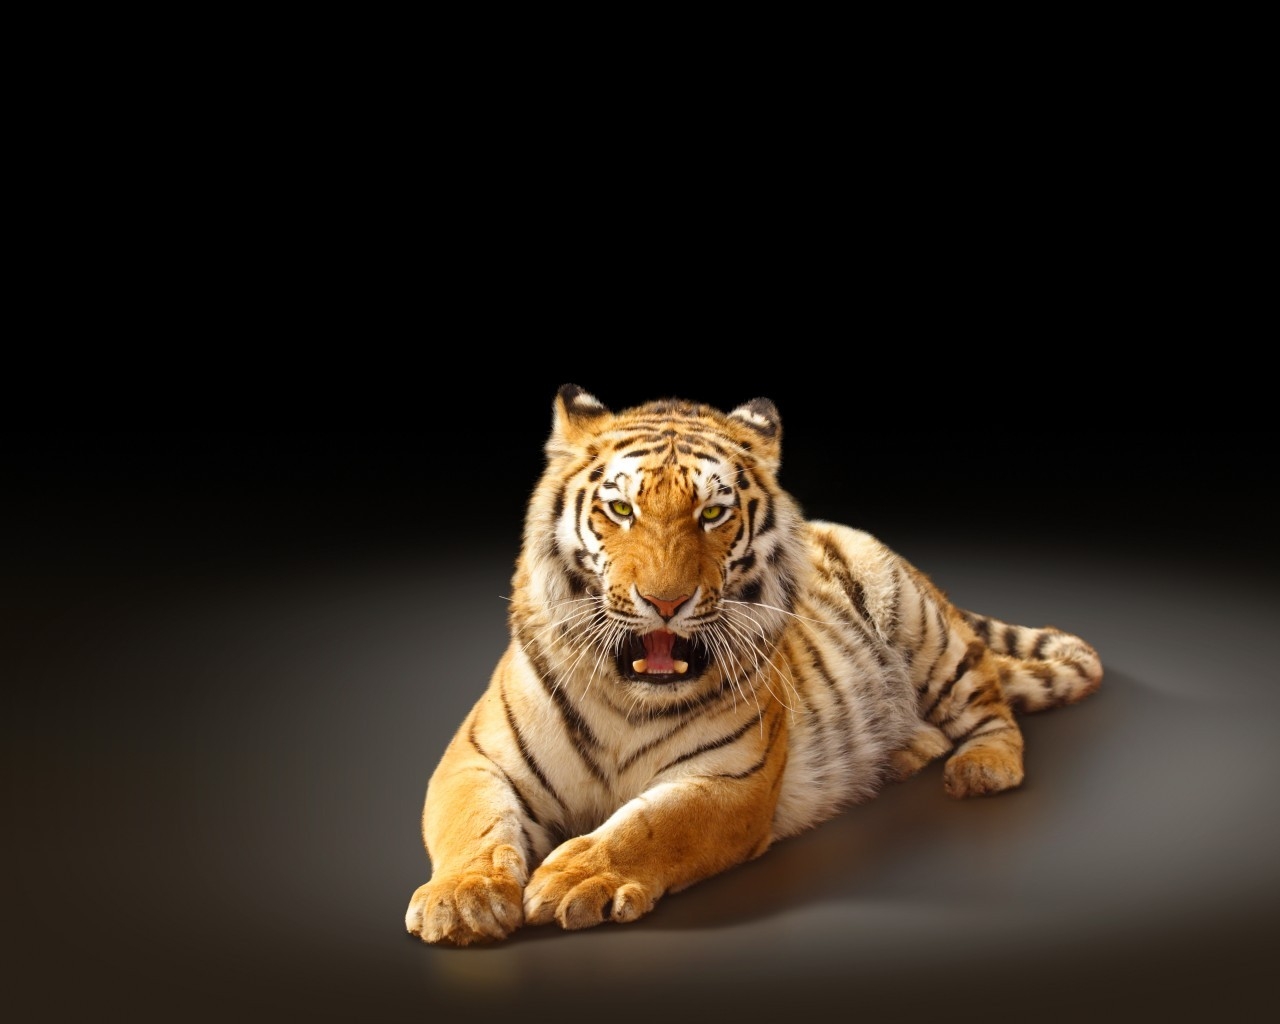 Angry Tiger Poster for 1280 x 1024 resolution